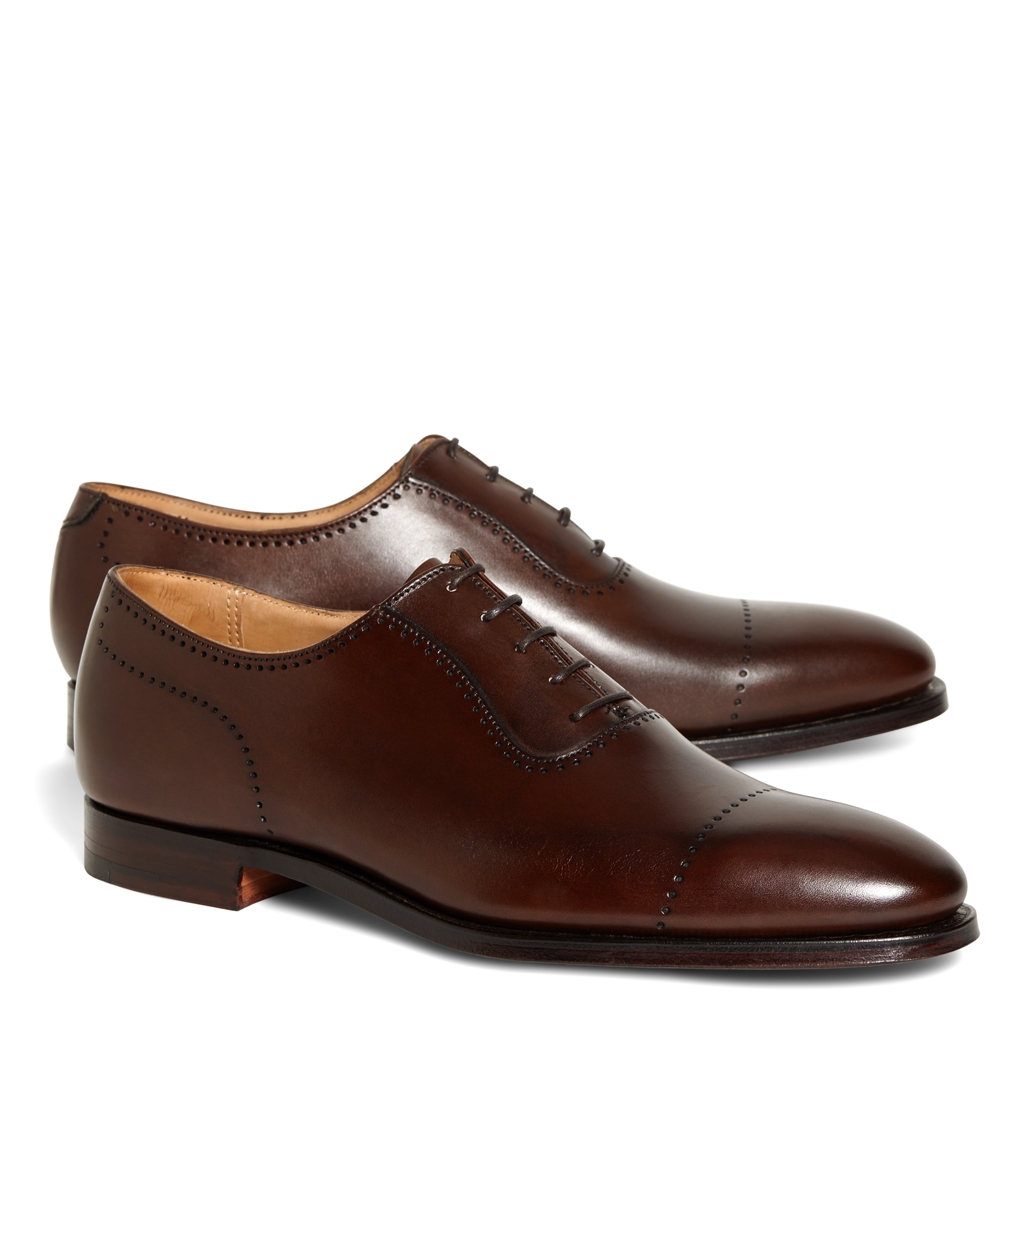 http://s7d4.scene7.com/is/image/BrooksBrothers/MH00447_BROWN?$bbenlarged$